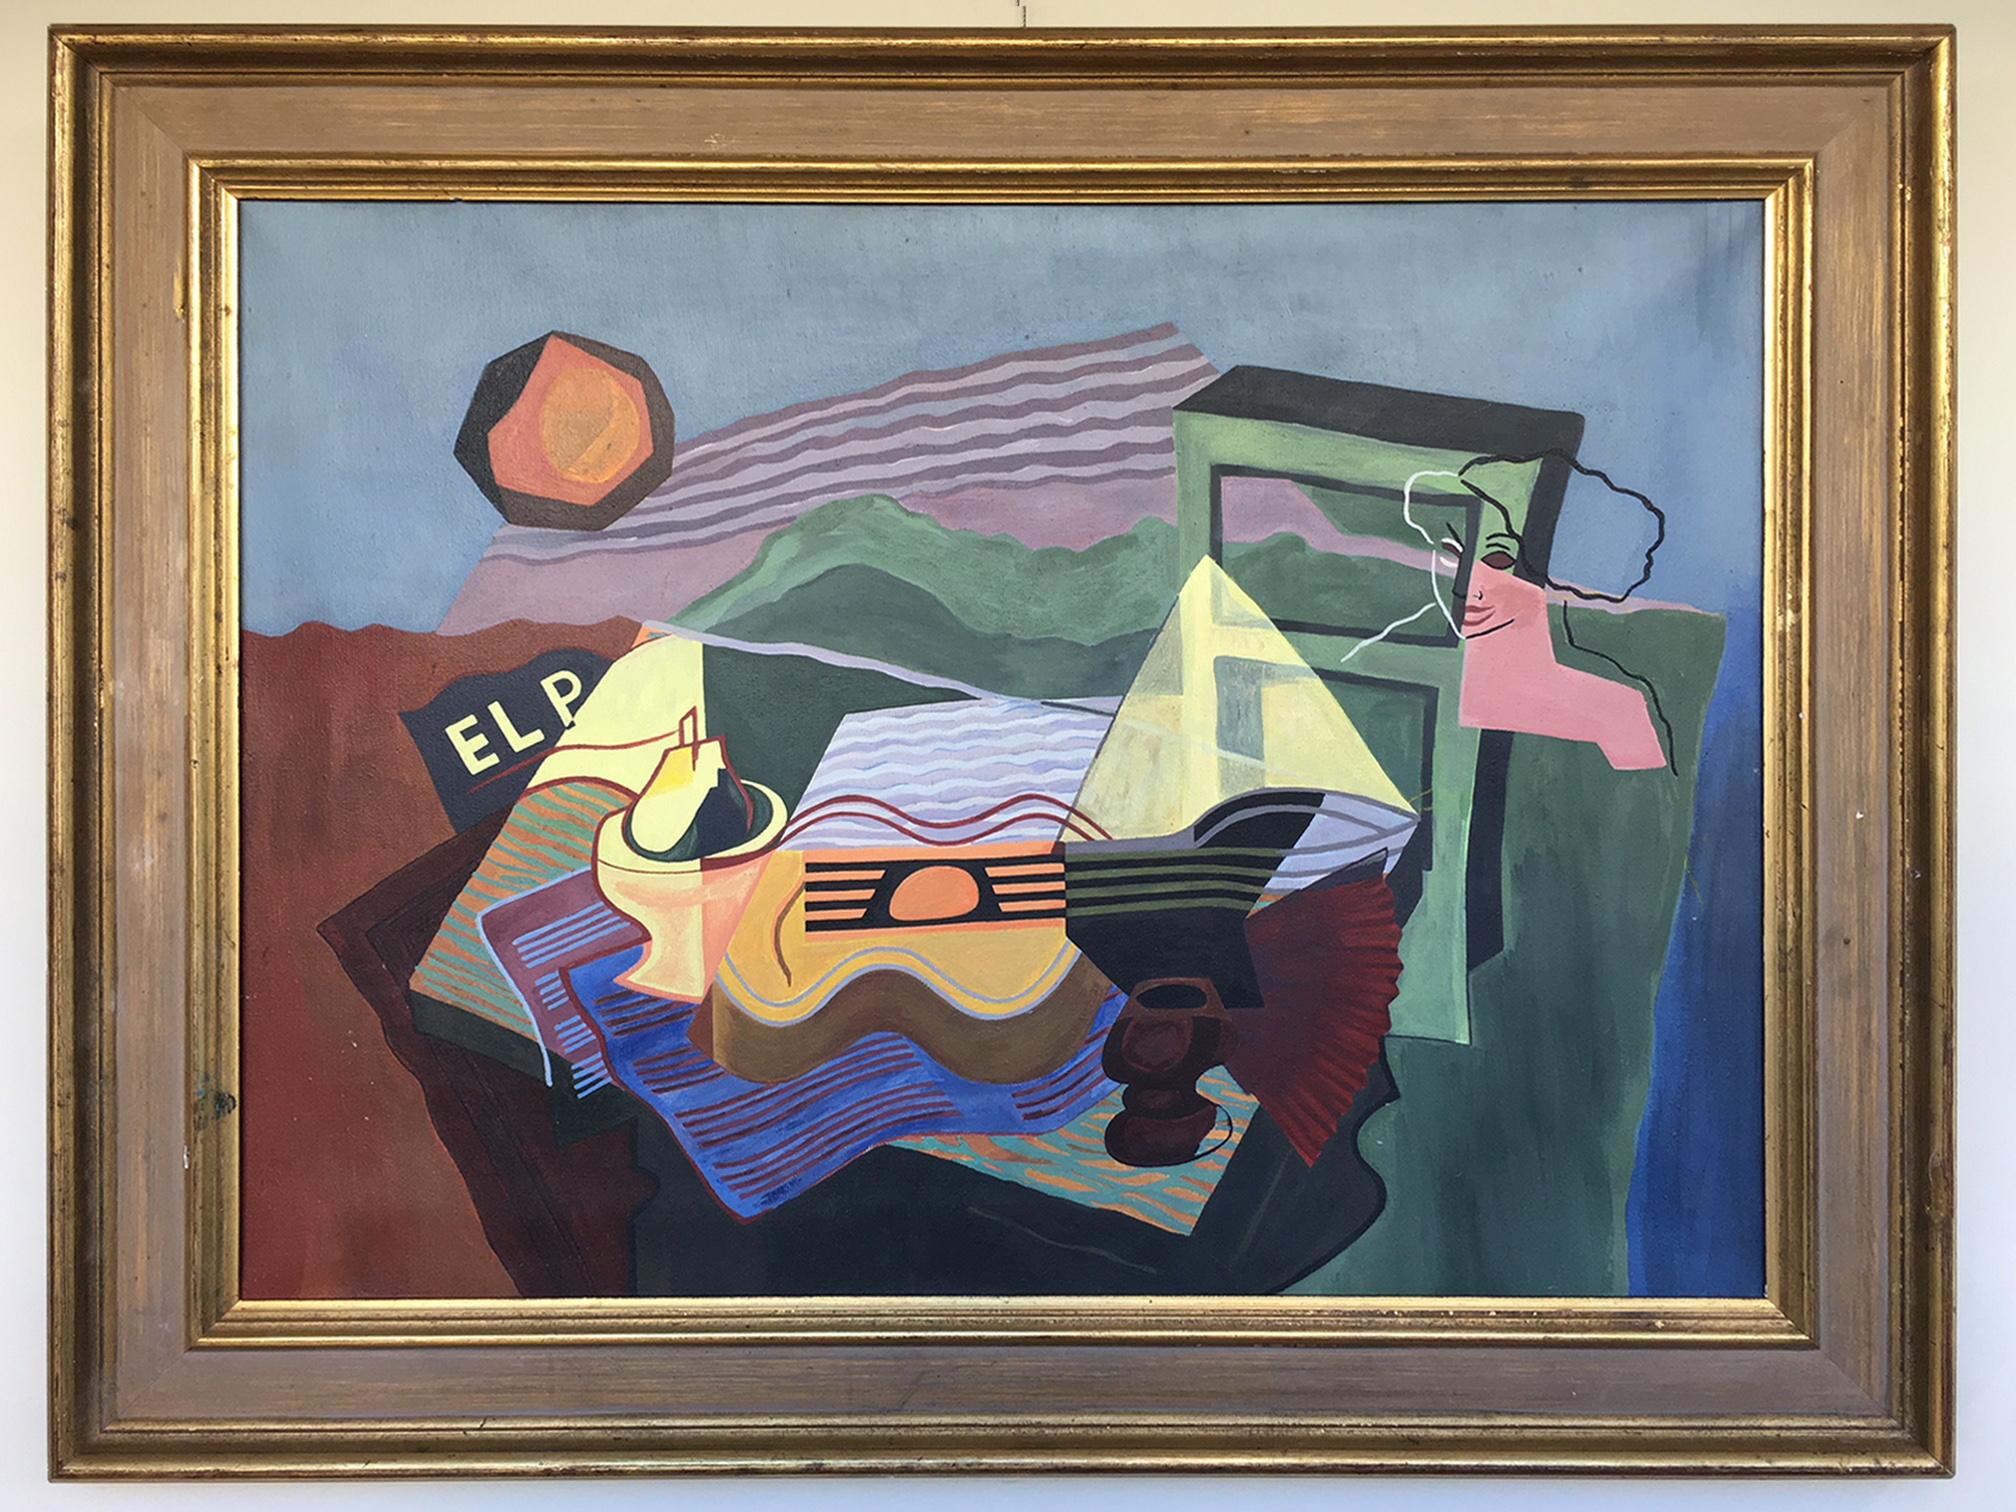 A polychrome Cubist oil on canvas
Spain, third quarter of the 20th century.